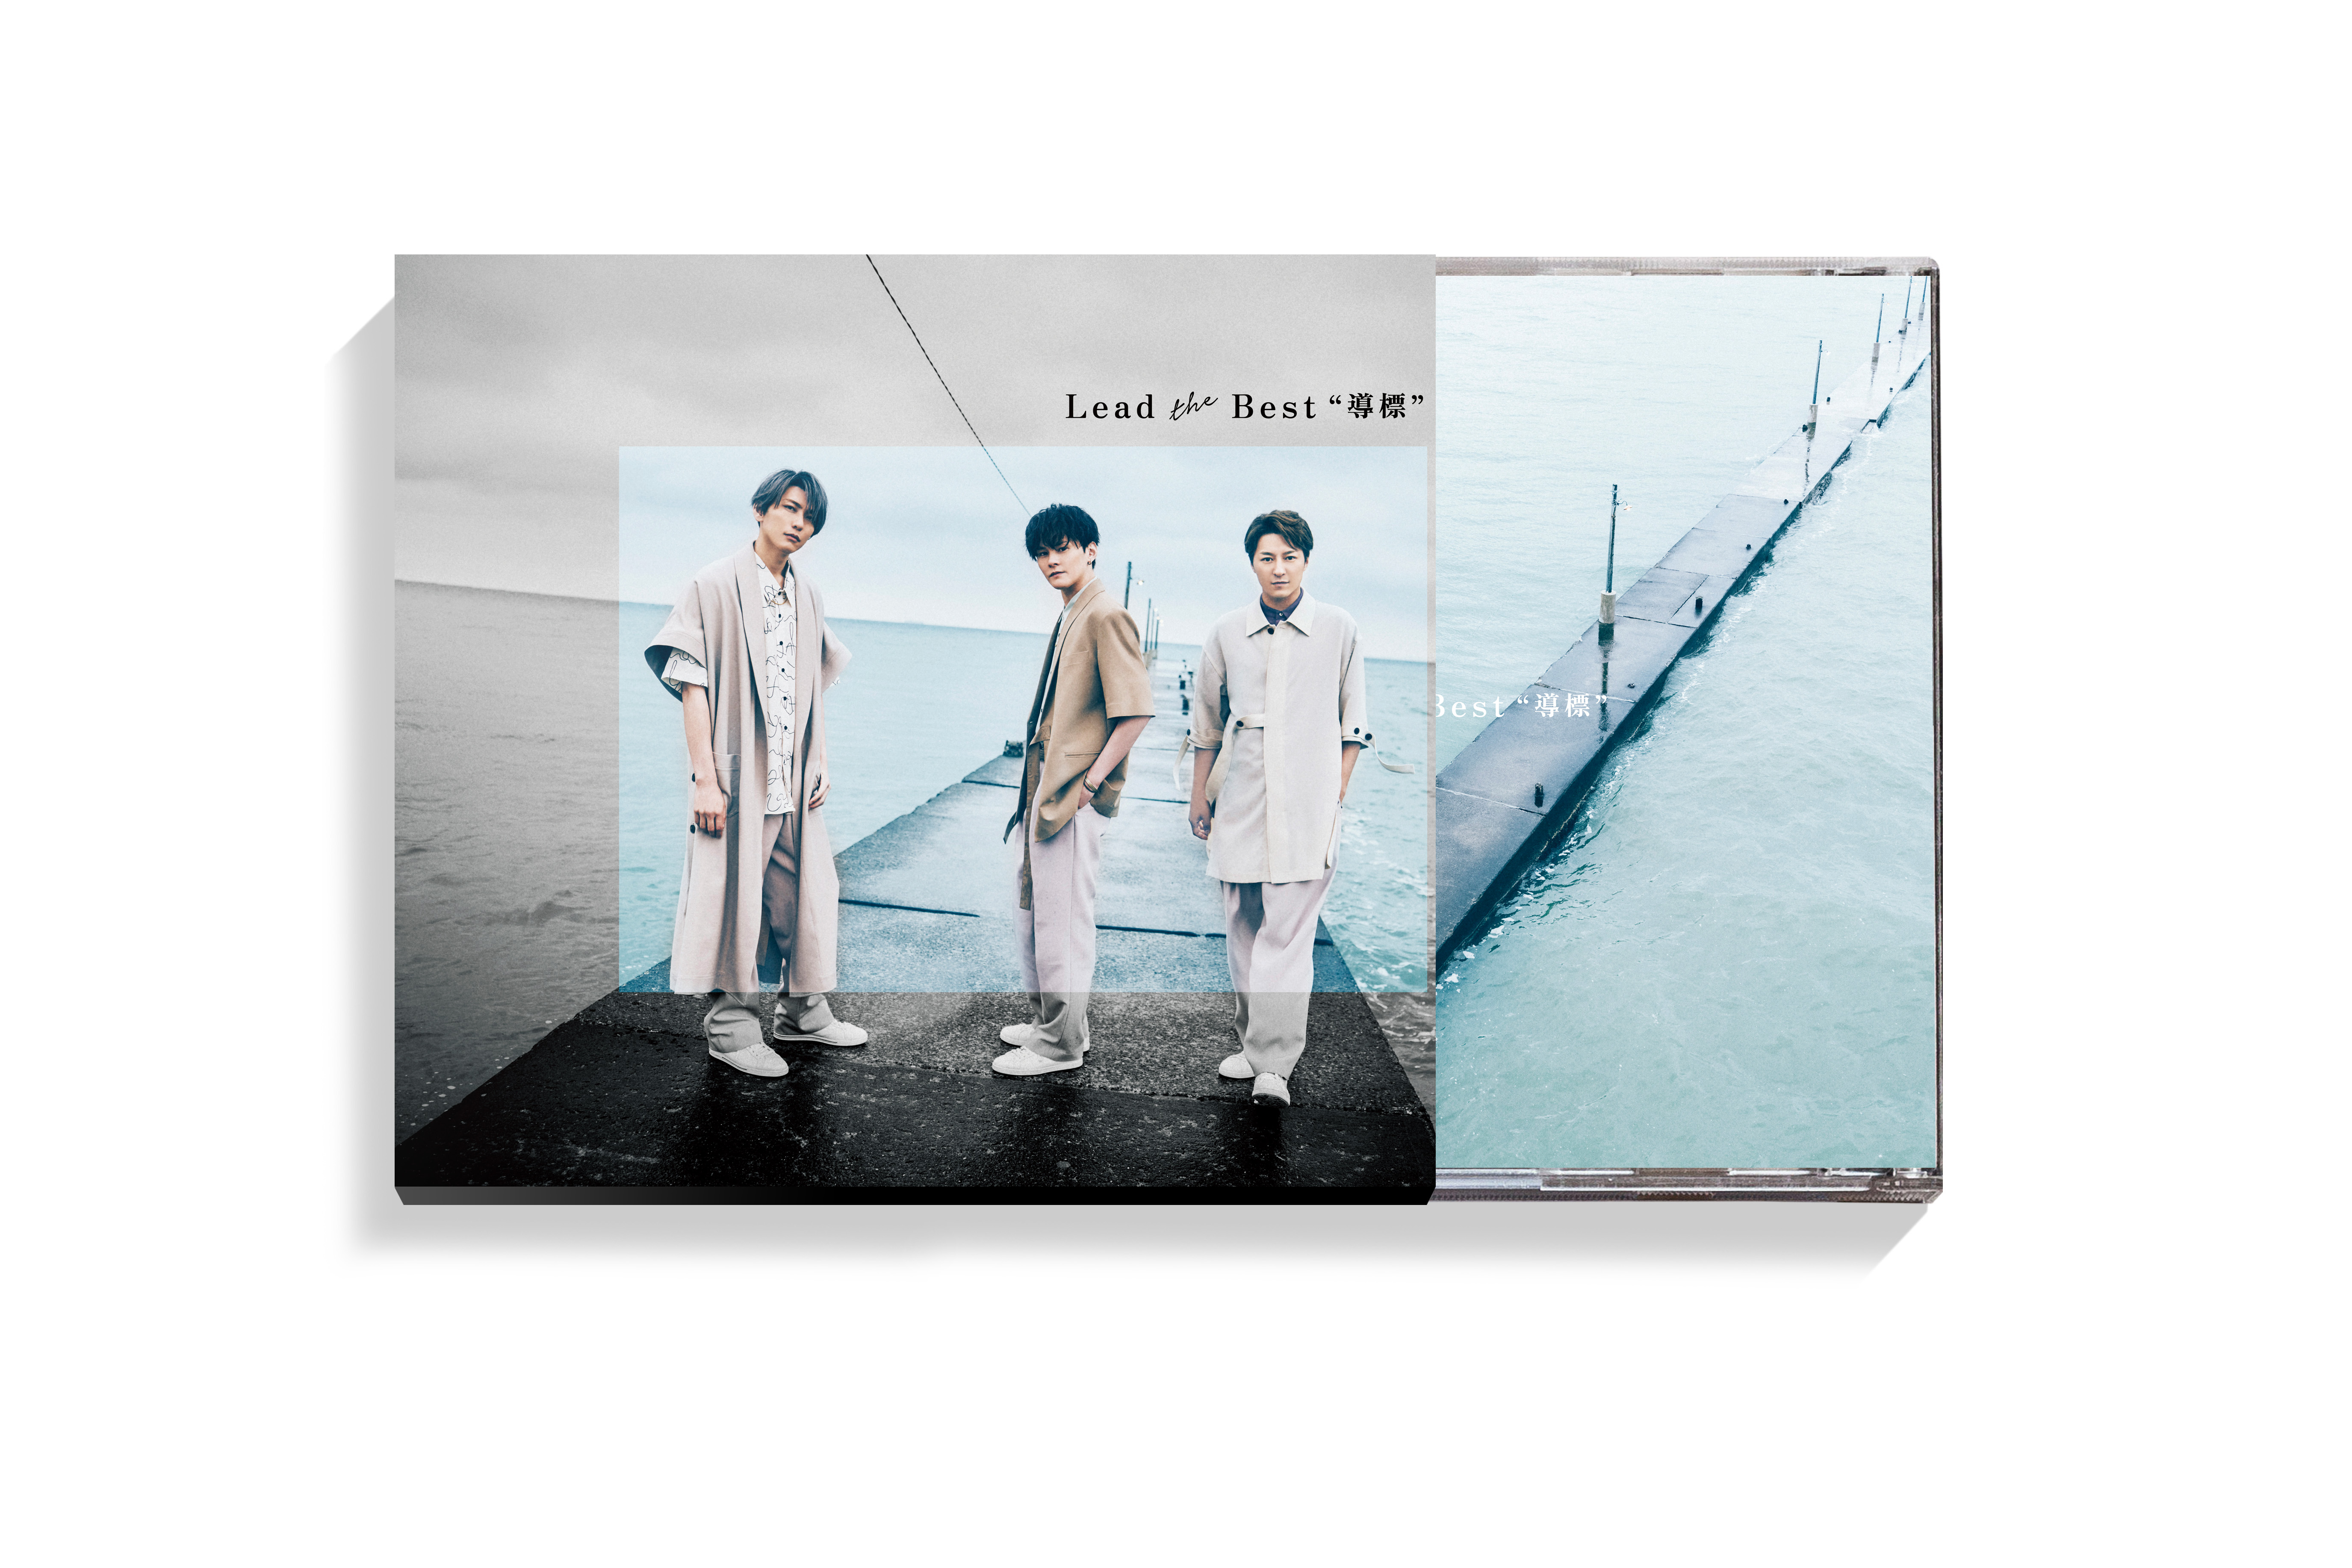 Lead the Best "Michishirube" Normal Edition (3CD) Release on July 31st,2022 No.2